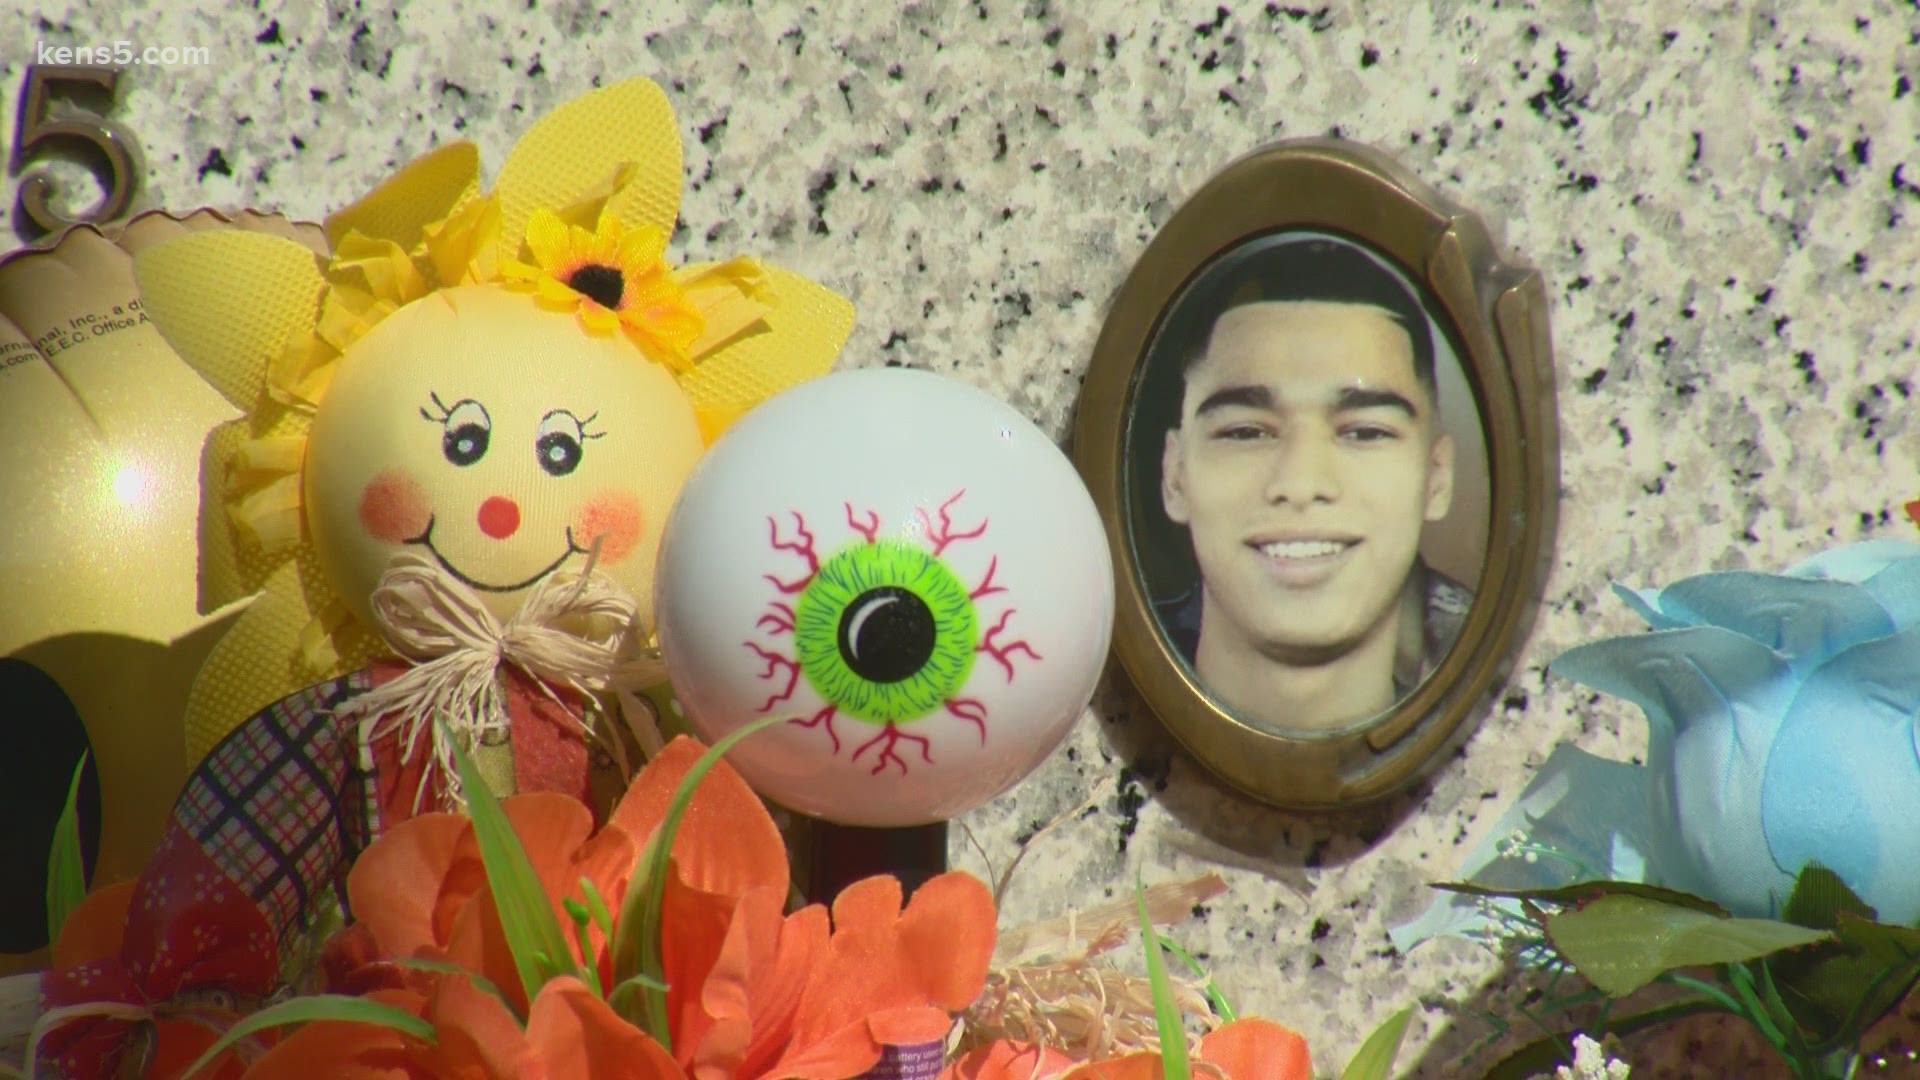 Isaac Orosco would have turned 25 years old last week. His mother is still holding out hope for justice in his death.